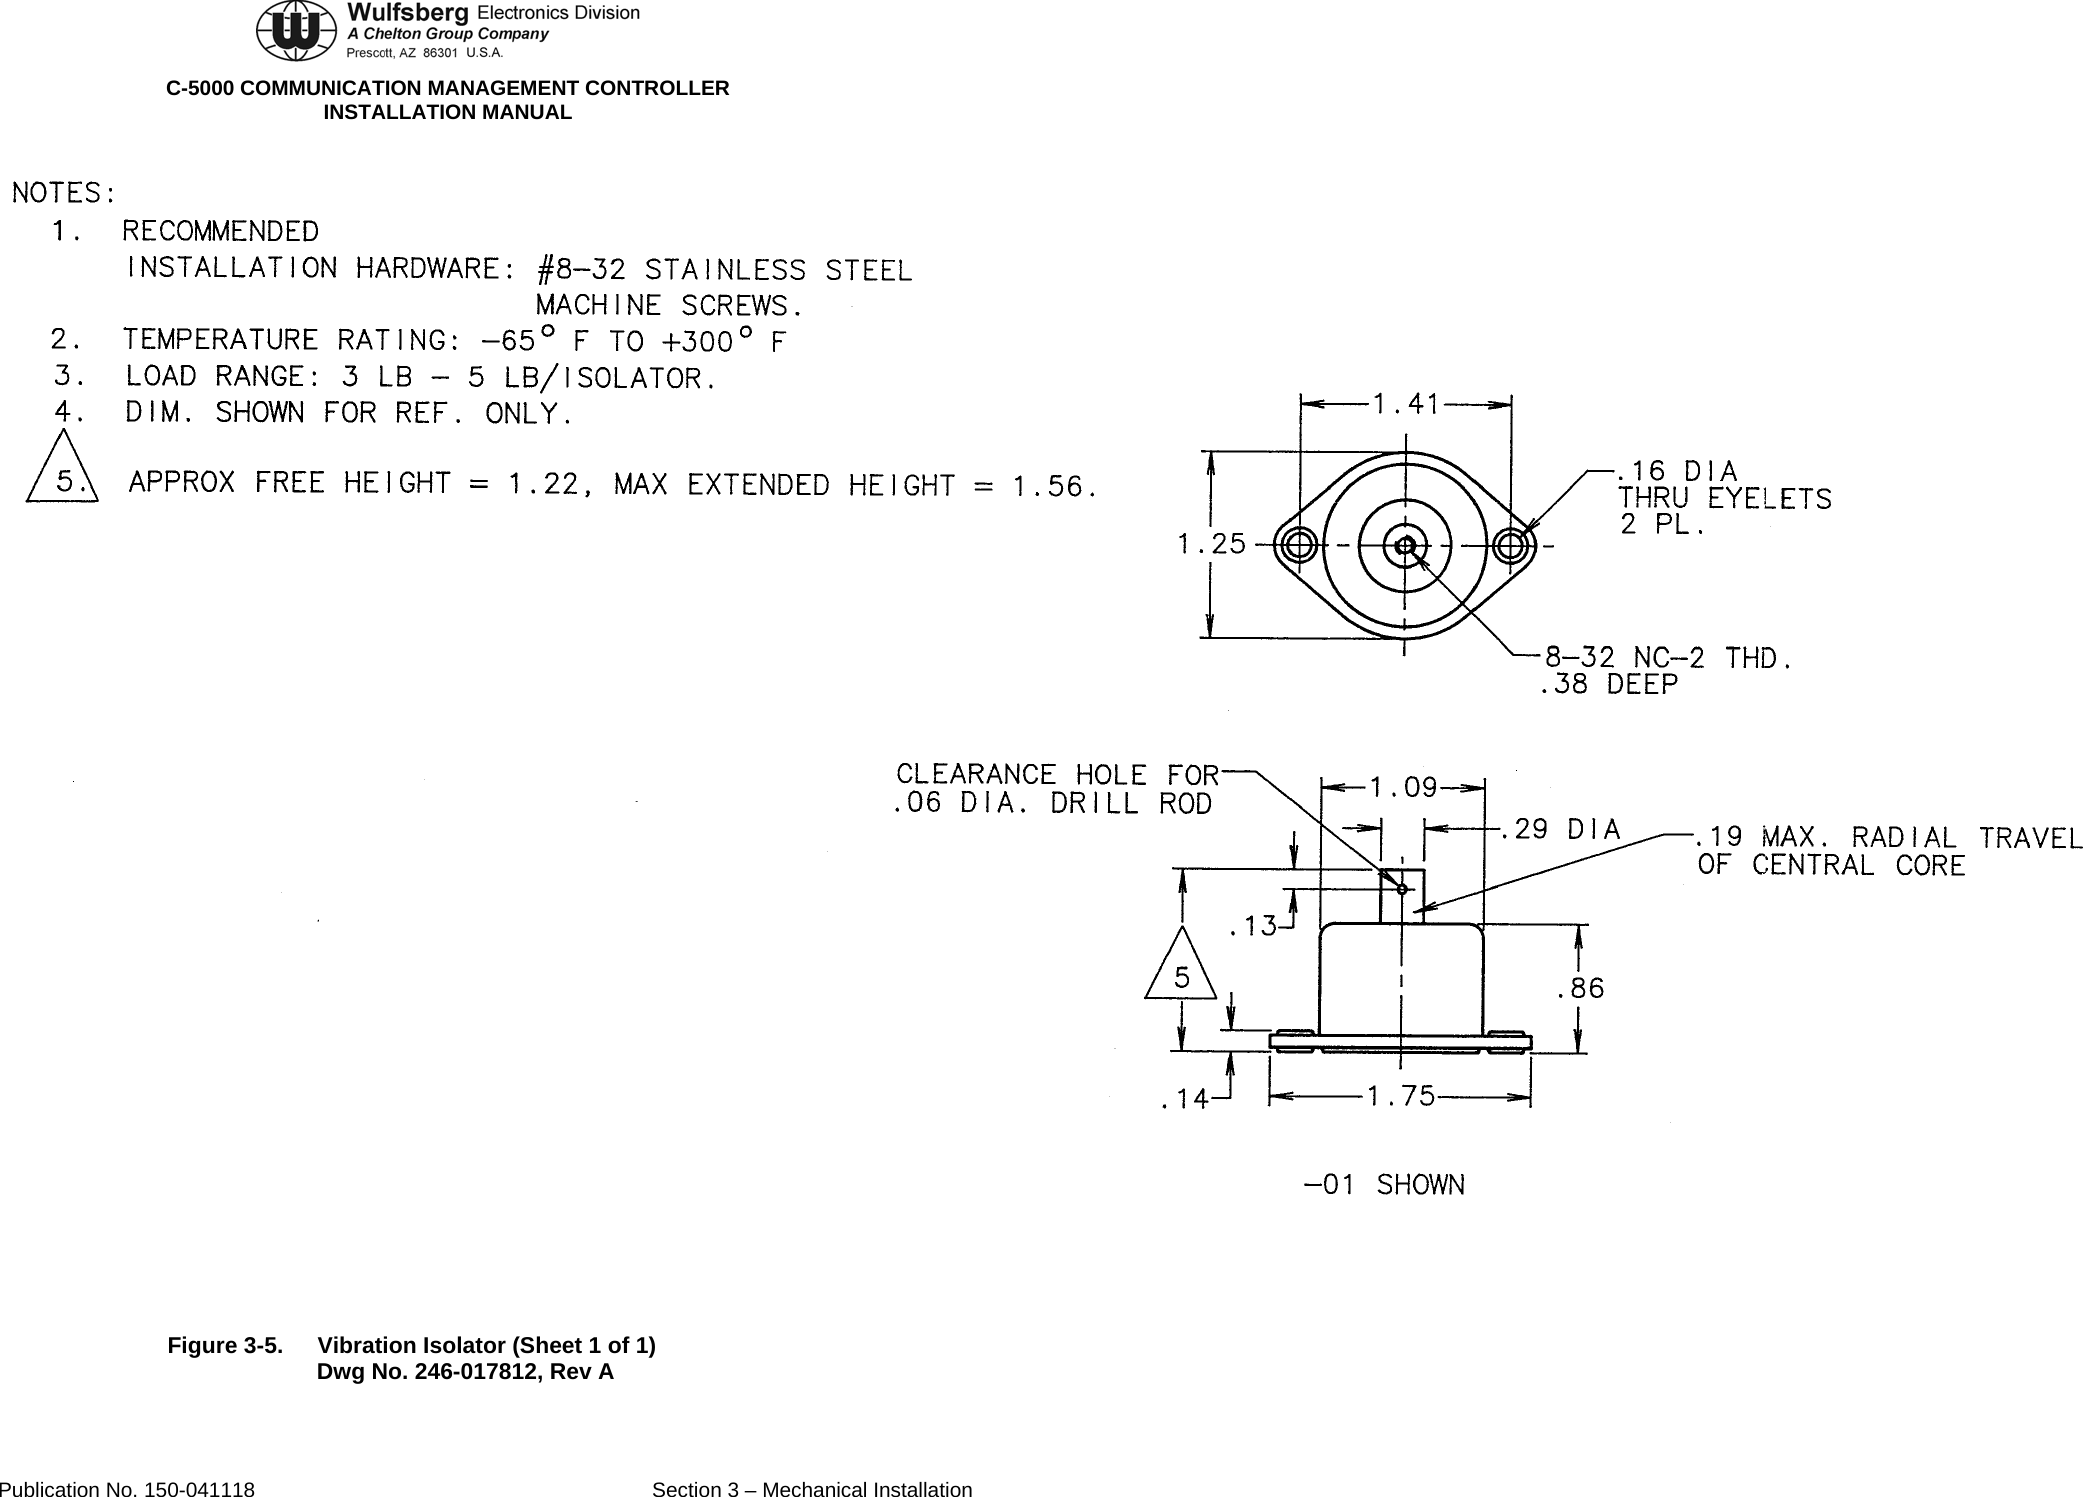  C-5000 COMMUNICATION MANAGEMENT CONTROLLER INSTALLATION MANUAL  Figure 3-5.  Vibration Isolator (Sheet 1 of 1) Dwg No. 246-017812, Rev A Publication No. 150-041118  Section 3 – Mechanical Installation 